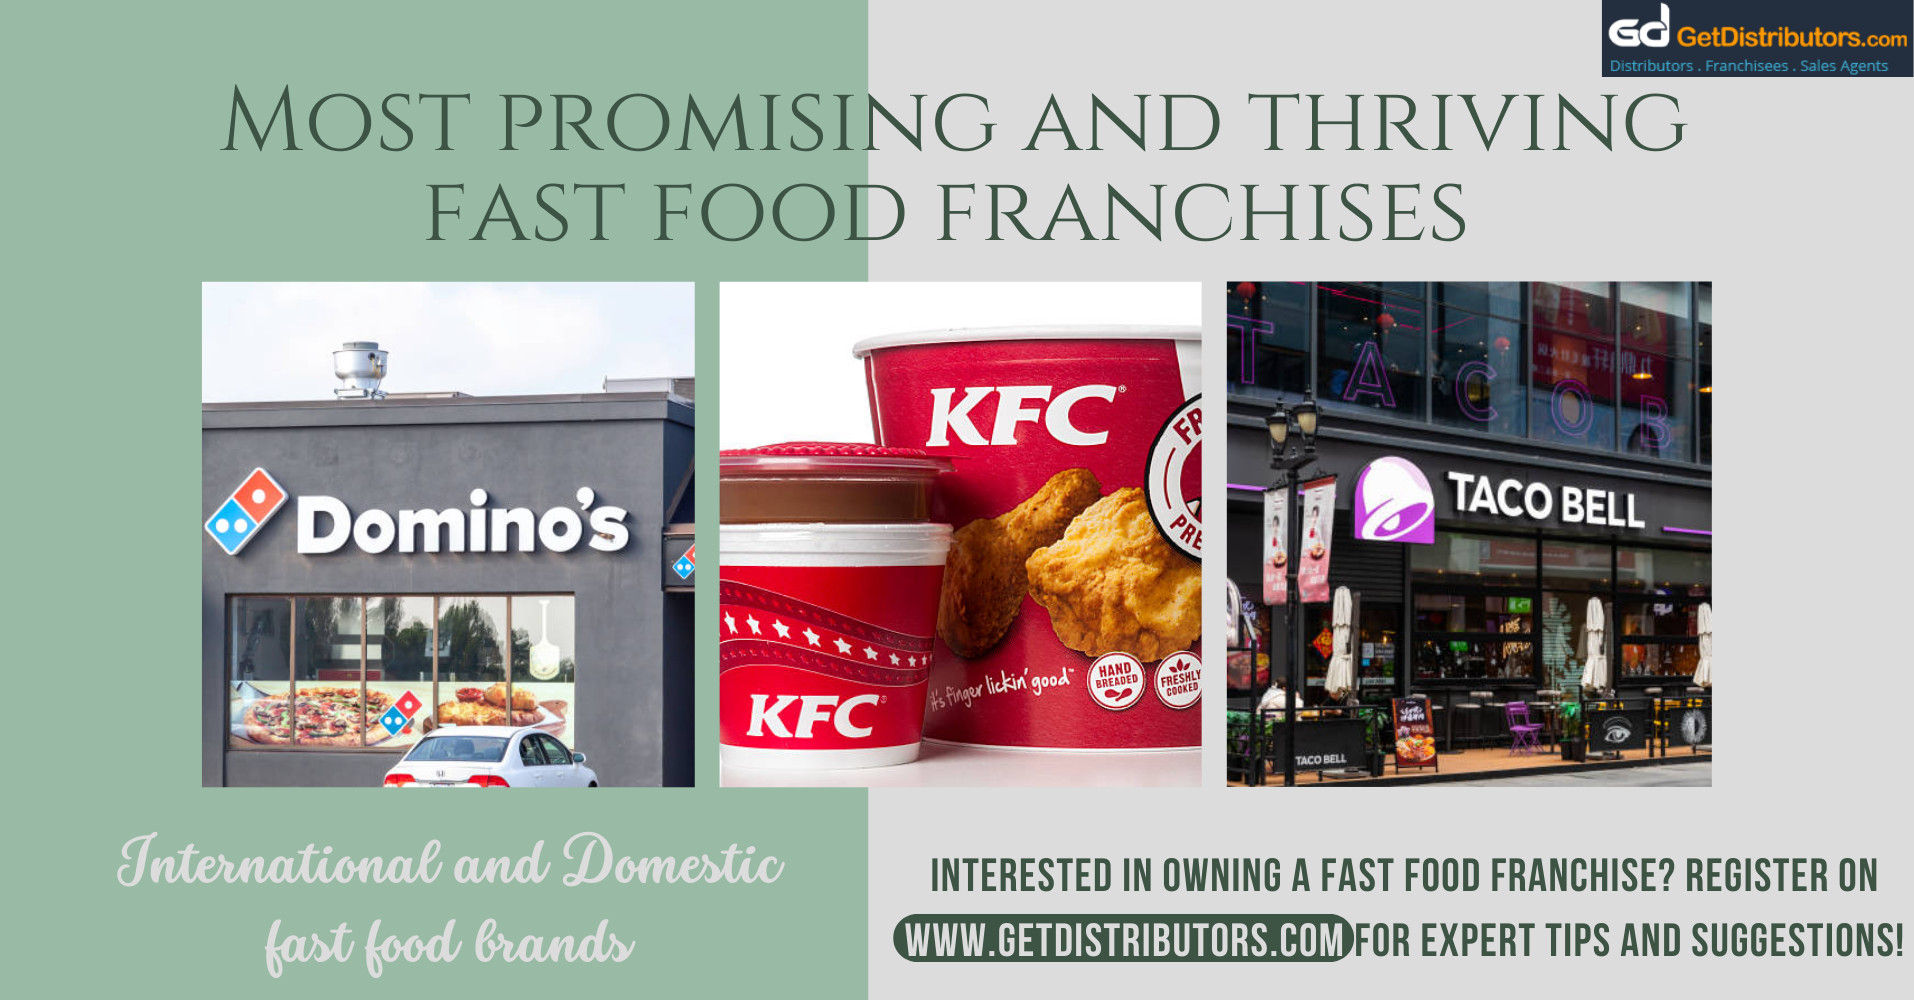 Most promising and thriving fast food franchises